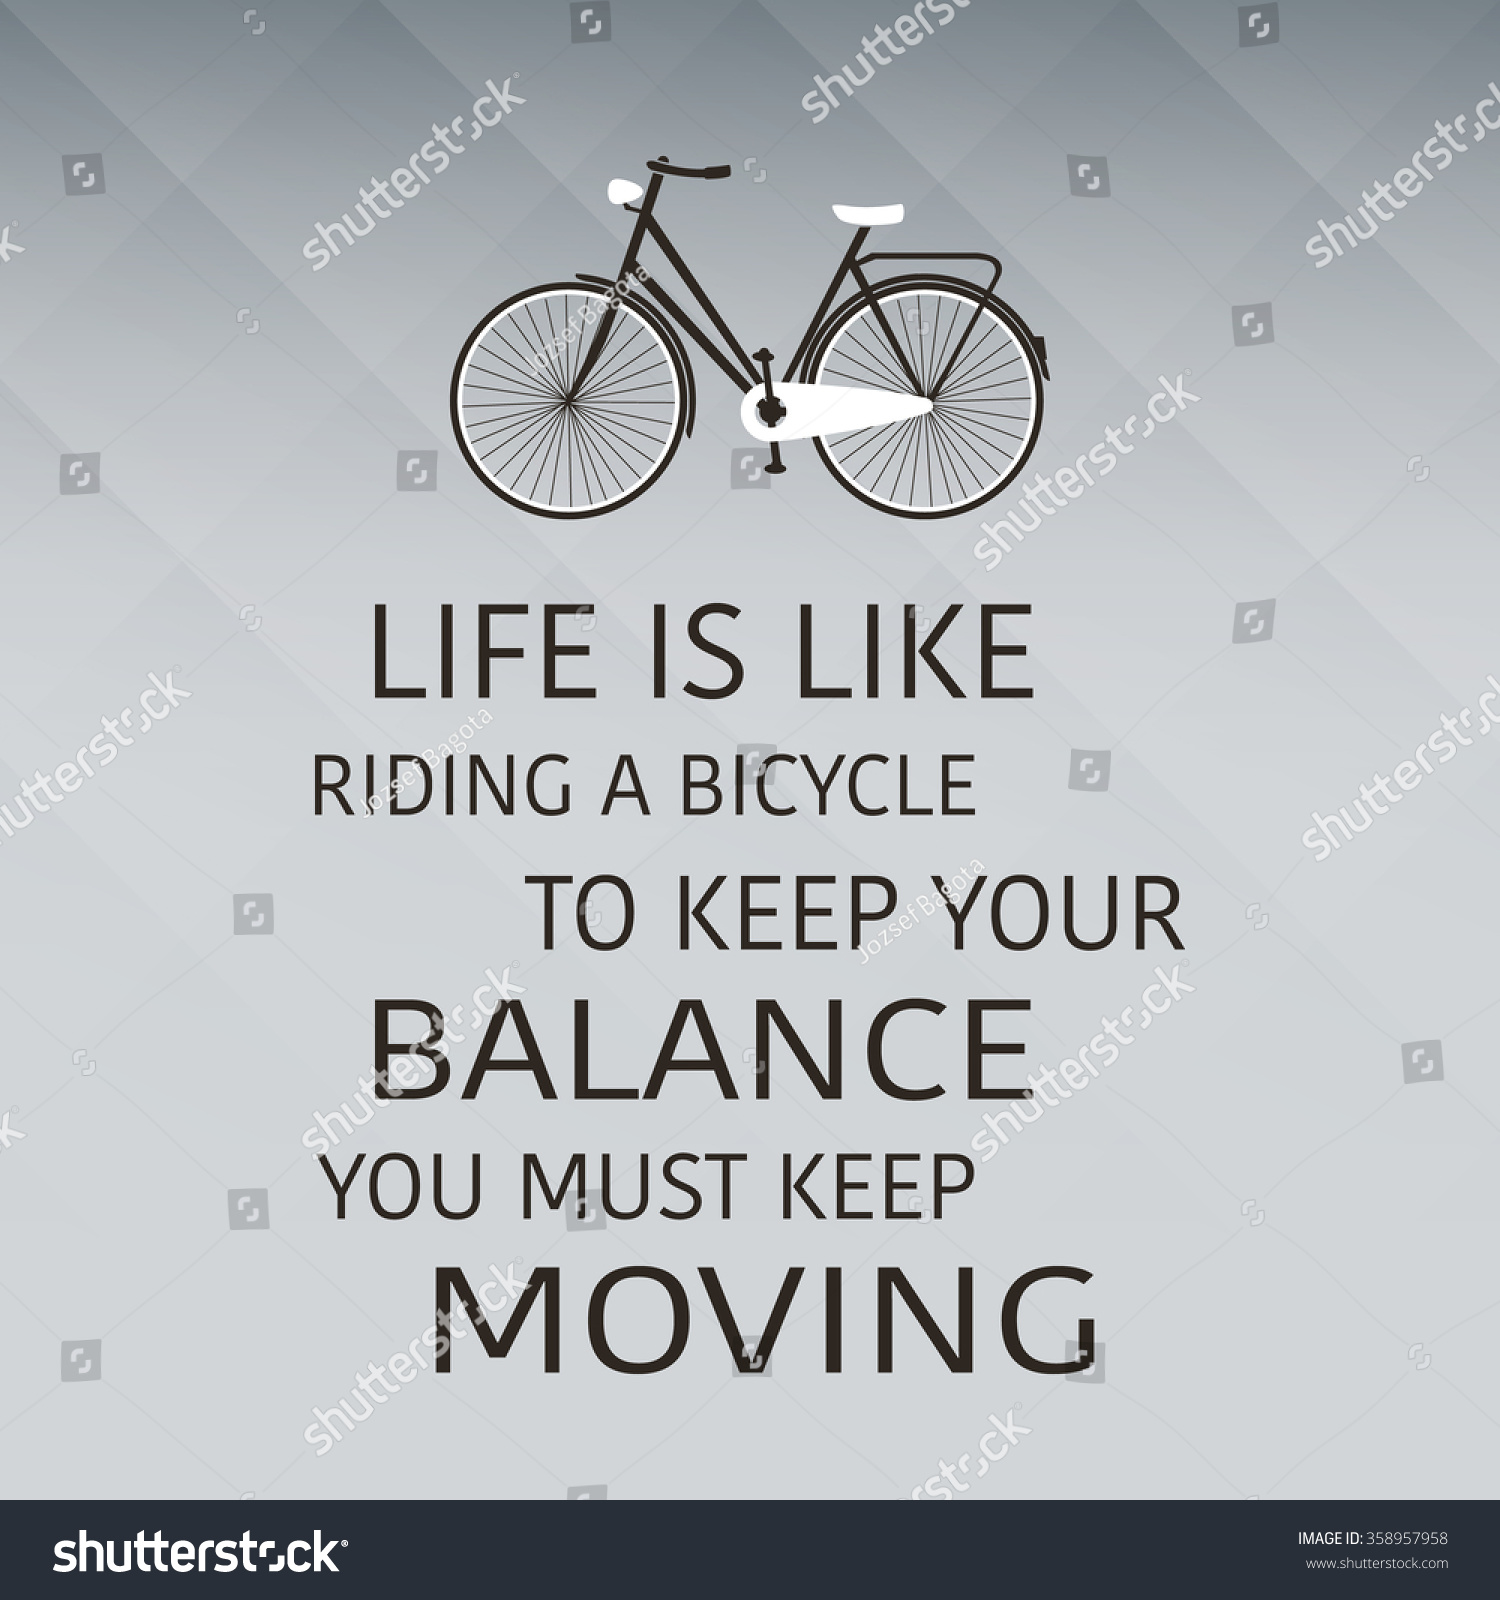 Life Is Like Riding A Bicycle To Keep Your Balance You Must Keep Moving